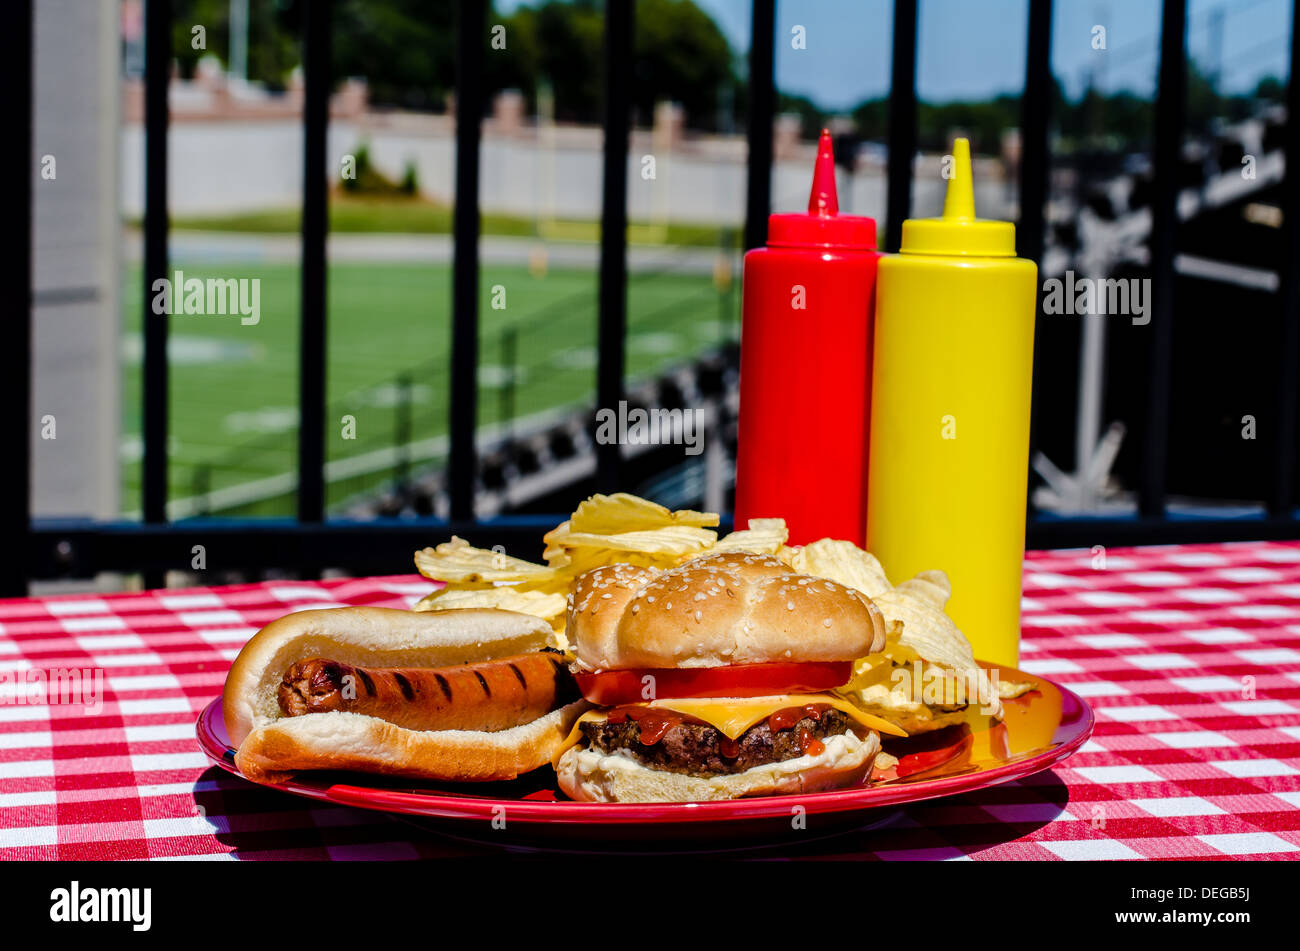 Tailgate party with cheeseburger, hot dog, potato chips and mustard and ketchup bottles. Football field in background. Stock Photo